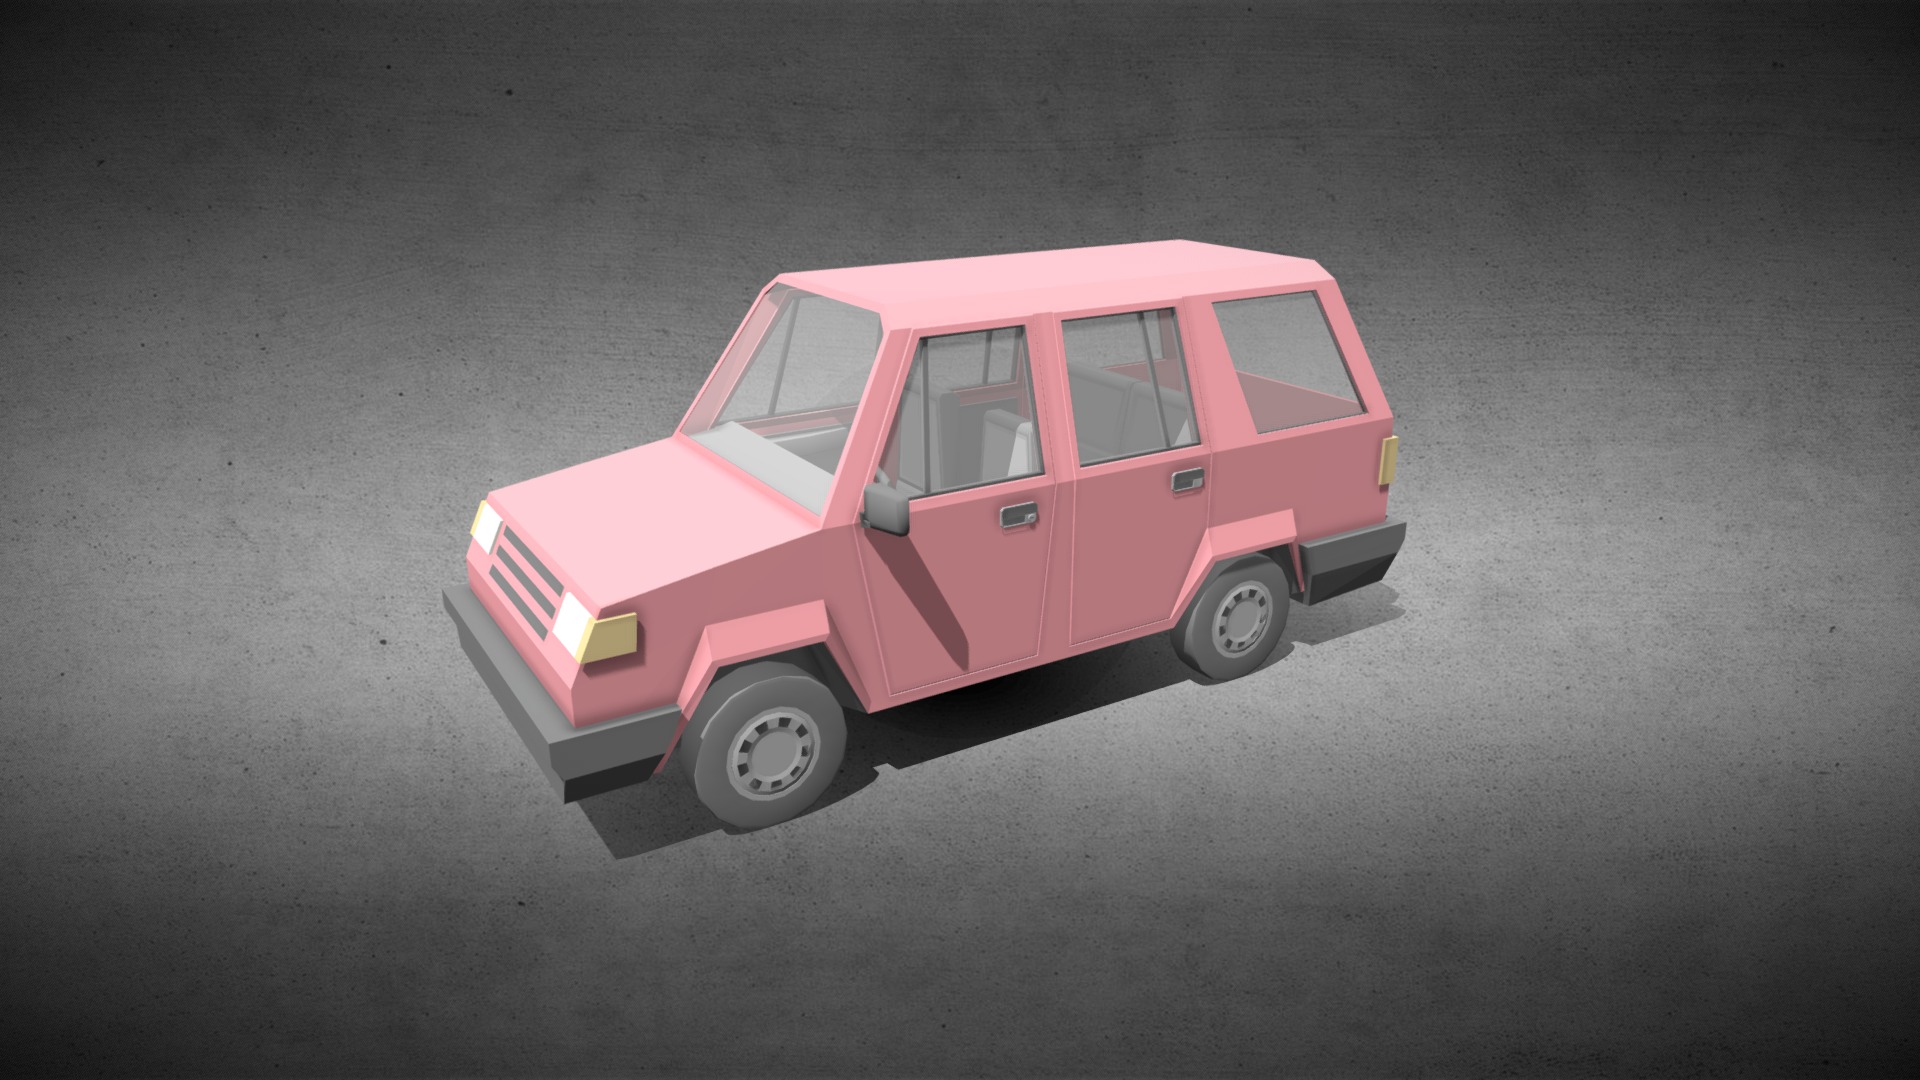 3D model Low-Poly Wagon car - This is a 3D model of the Low-Poly Wagon car. The 3D model is about a small pink car.